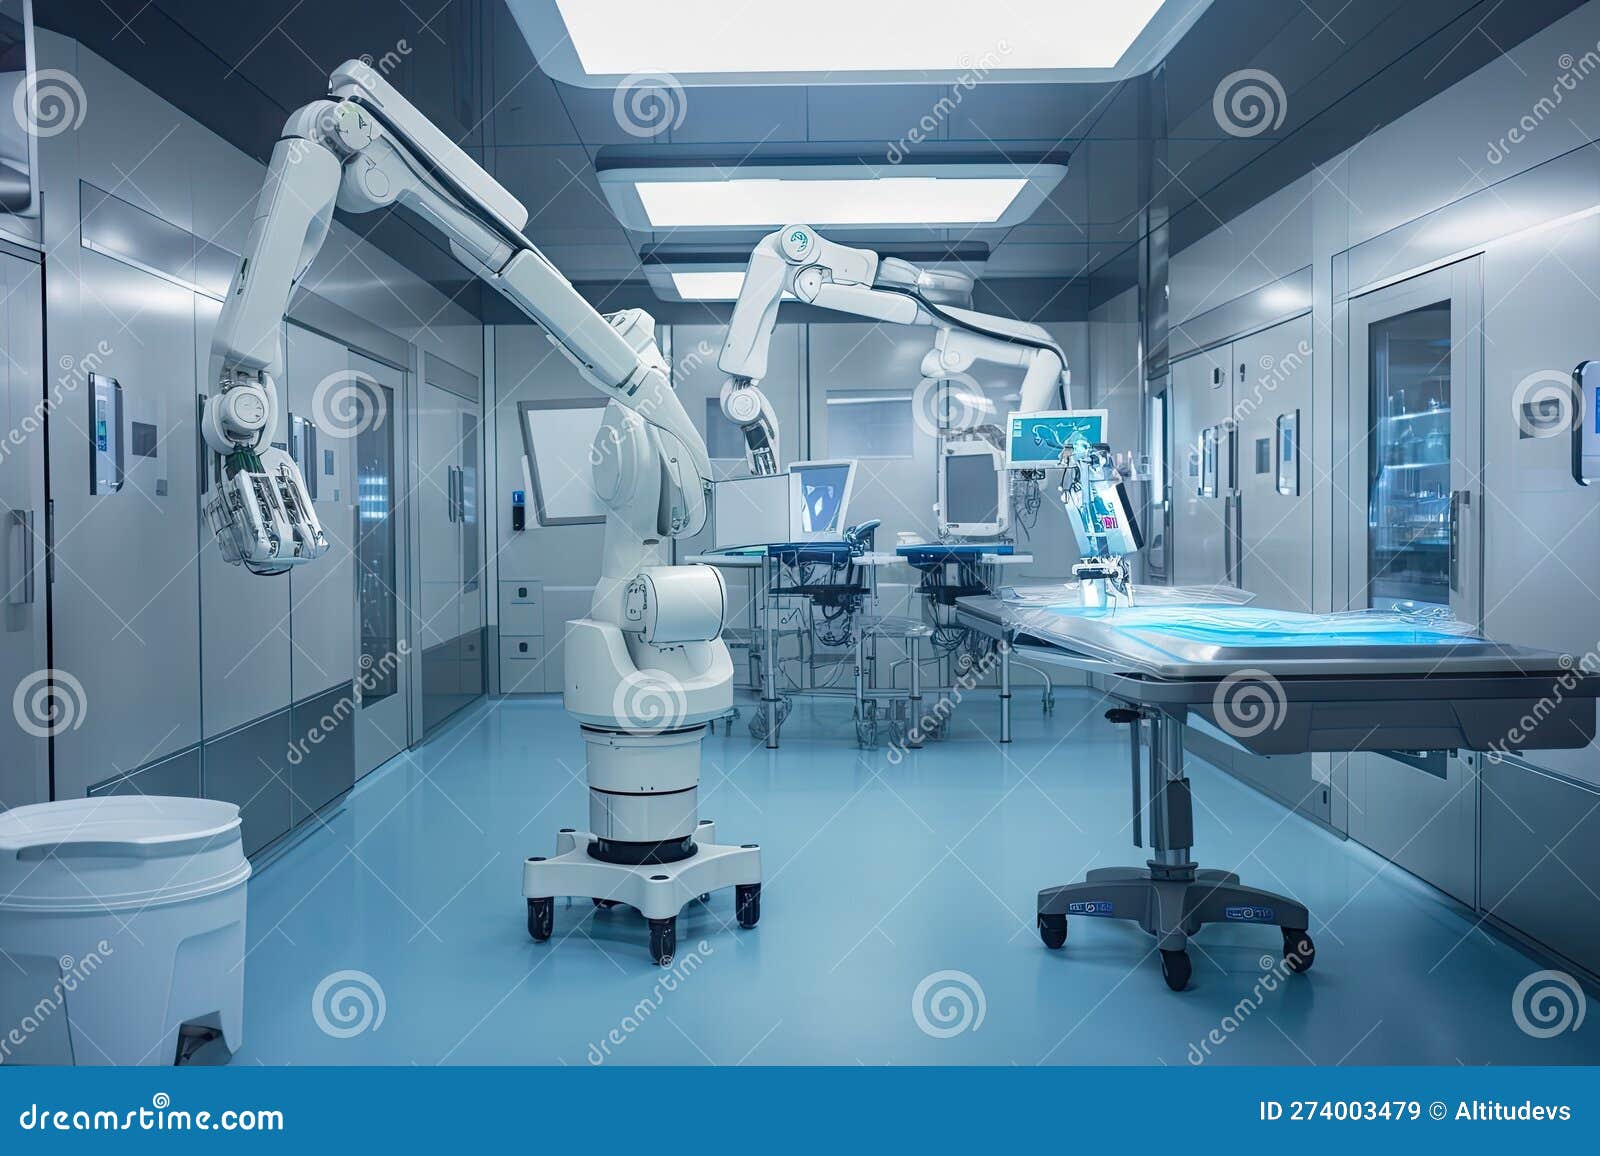 Cleanroom With Surgical Robots Performing Delicate Stock Photography ...